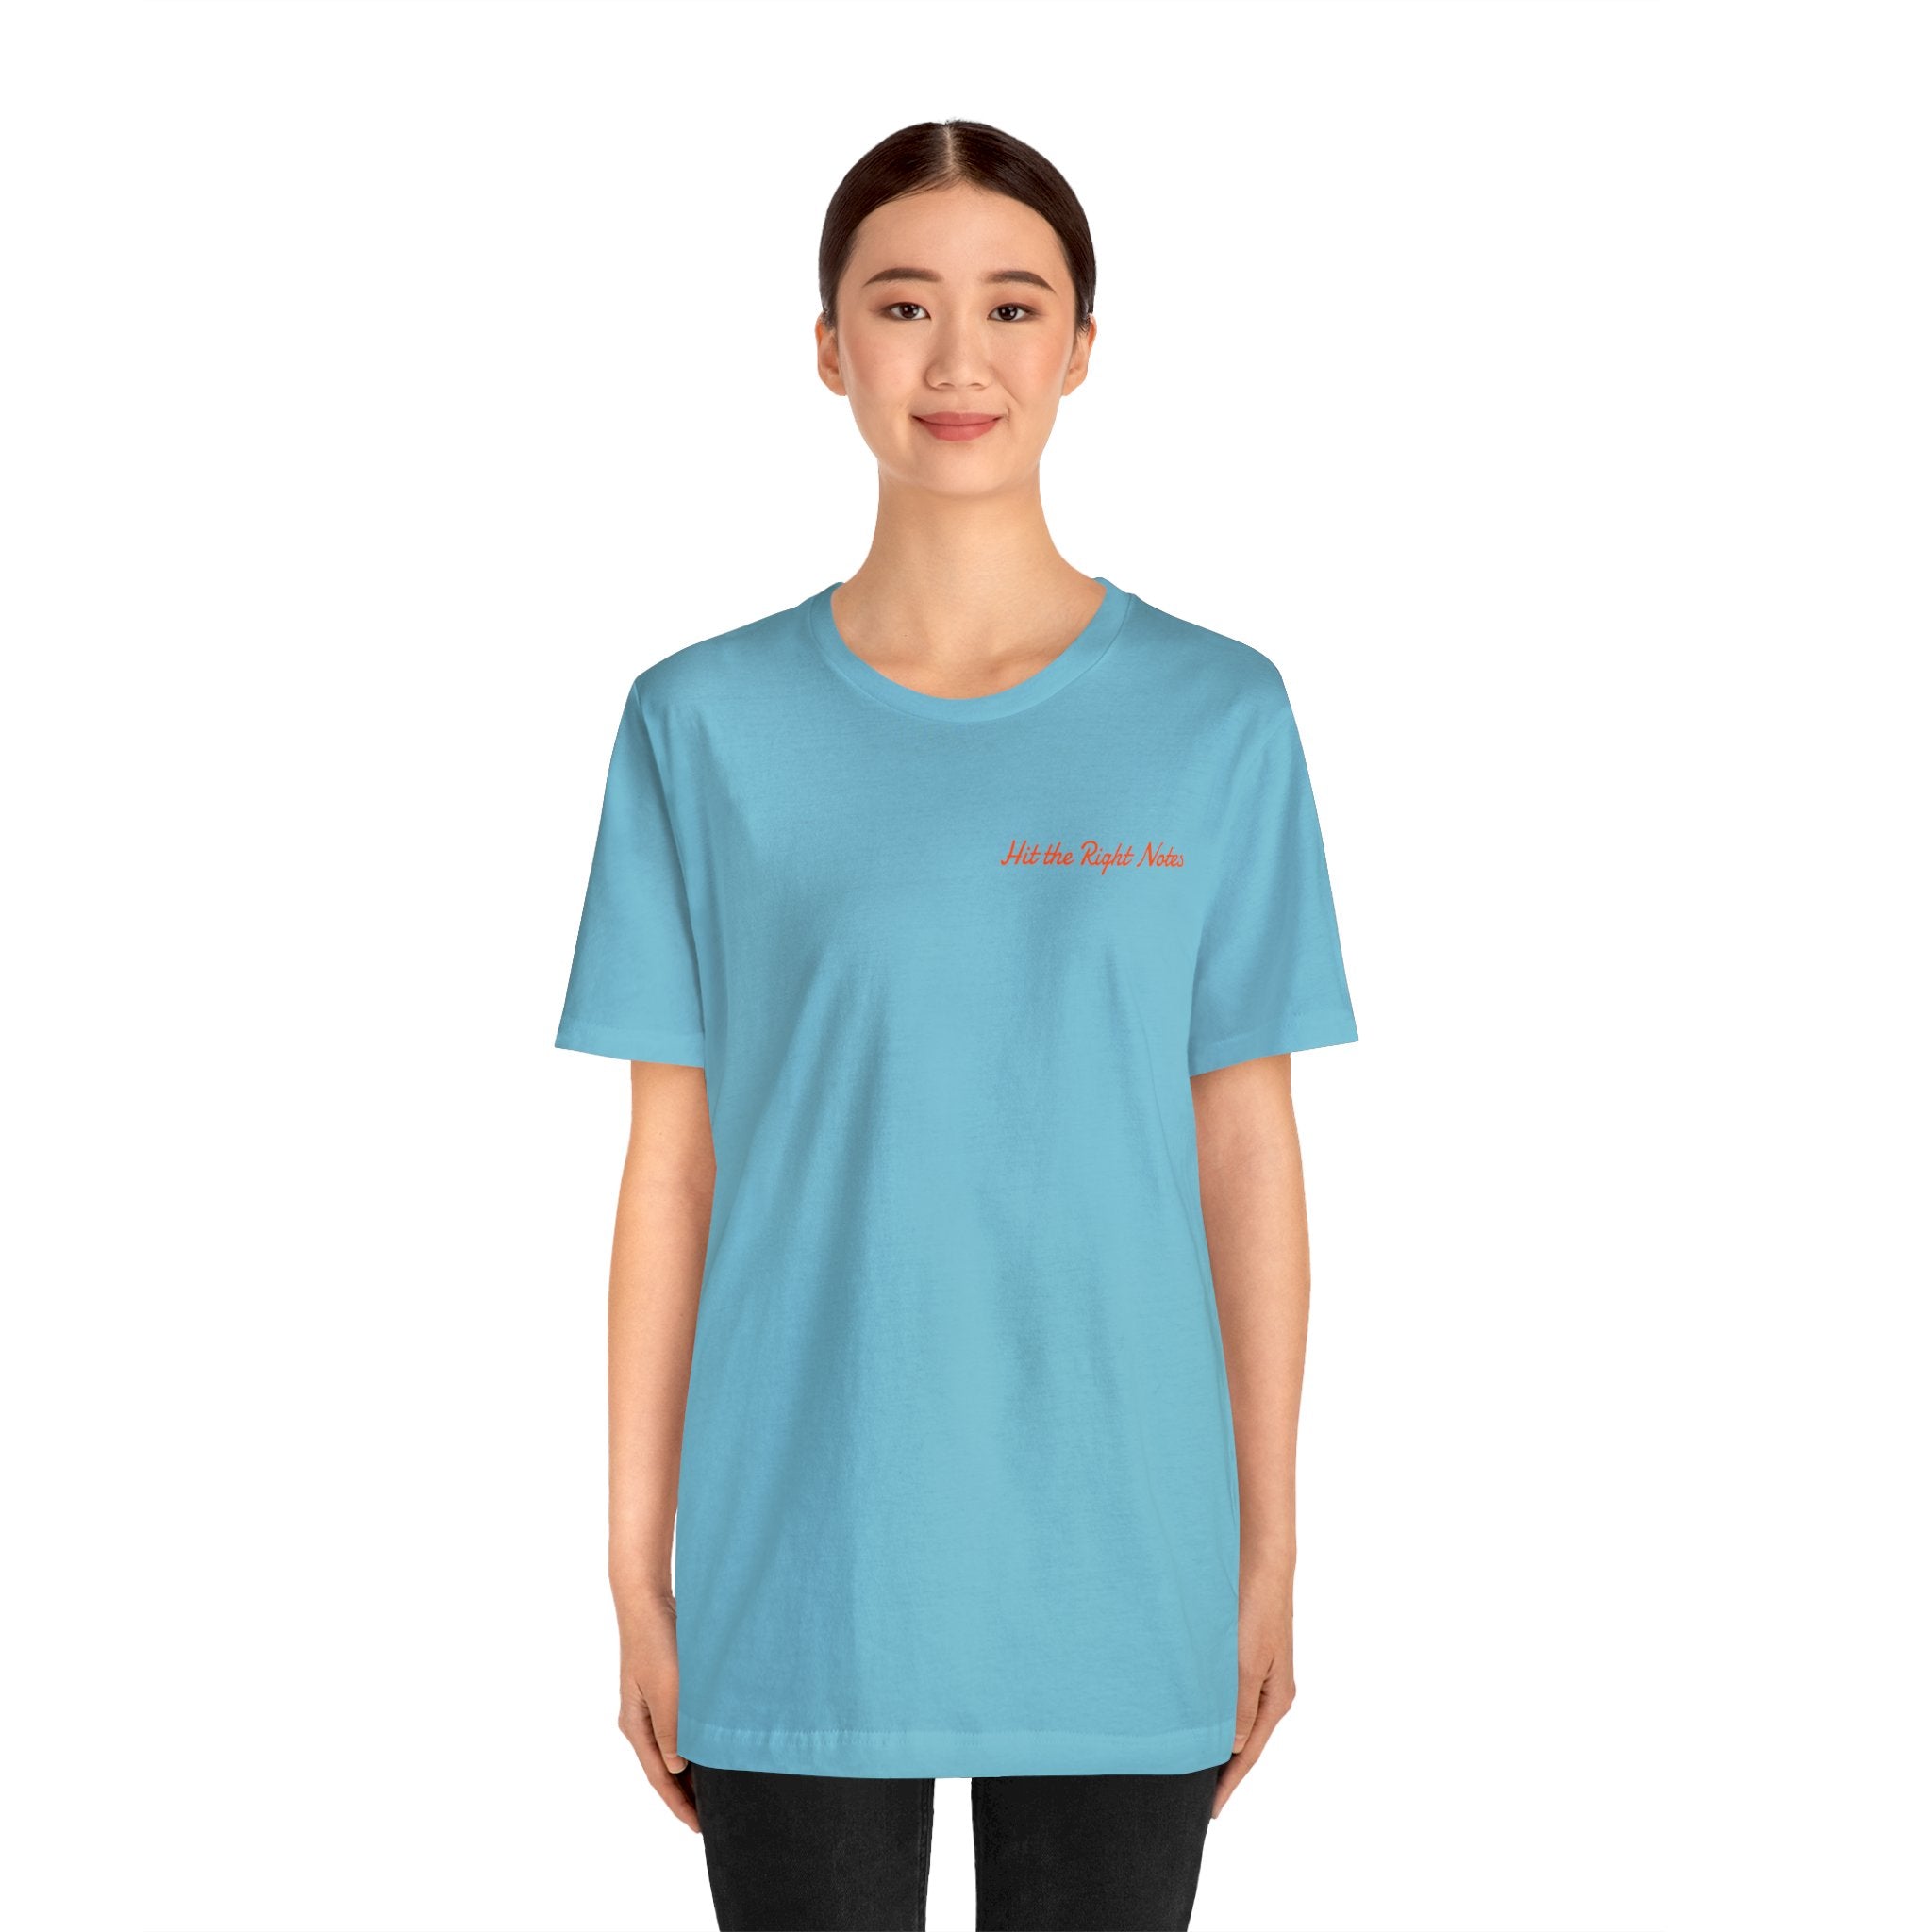 Hit the Right Notes Jersey Tee - Bella+Canvas 3001 Heather Mauve Classic Tee Comfortable Tee Cotton T-Shirt Graphic Tee JerseyTee Statement Shirt T-shirt Tee Unisex Apparel T-Shirt 14854513223522697467_2048 Printify